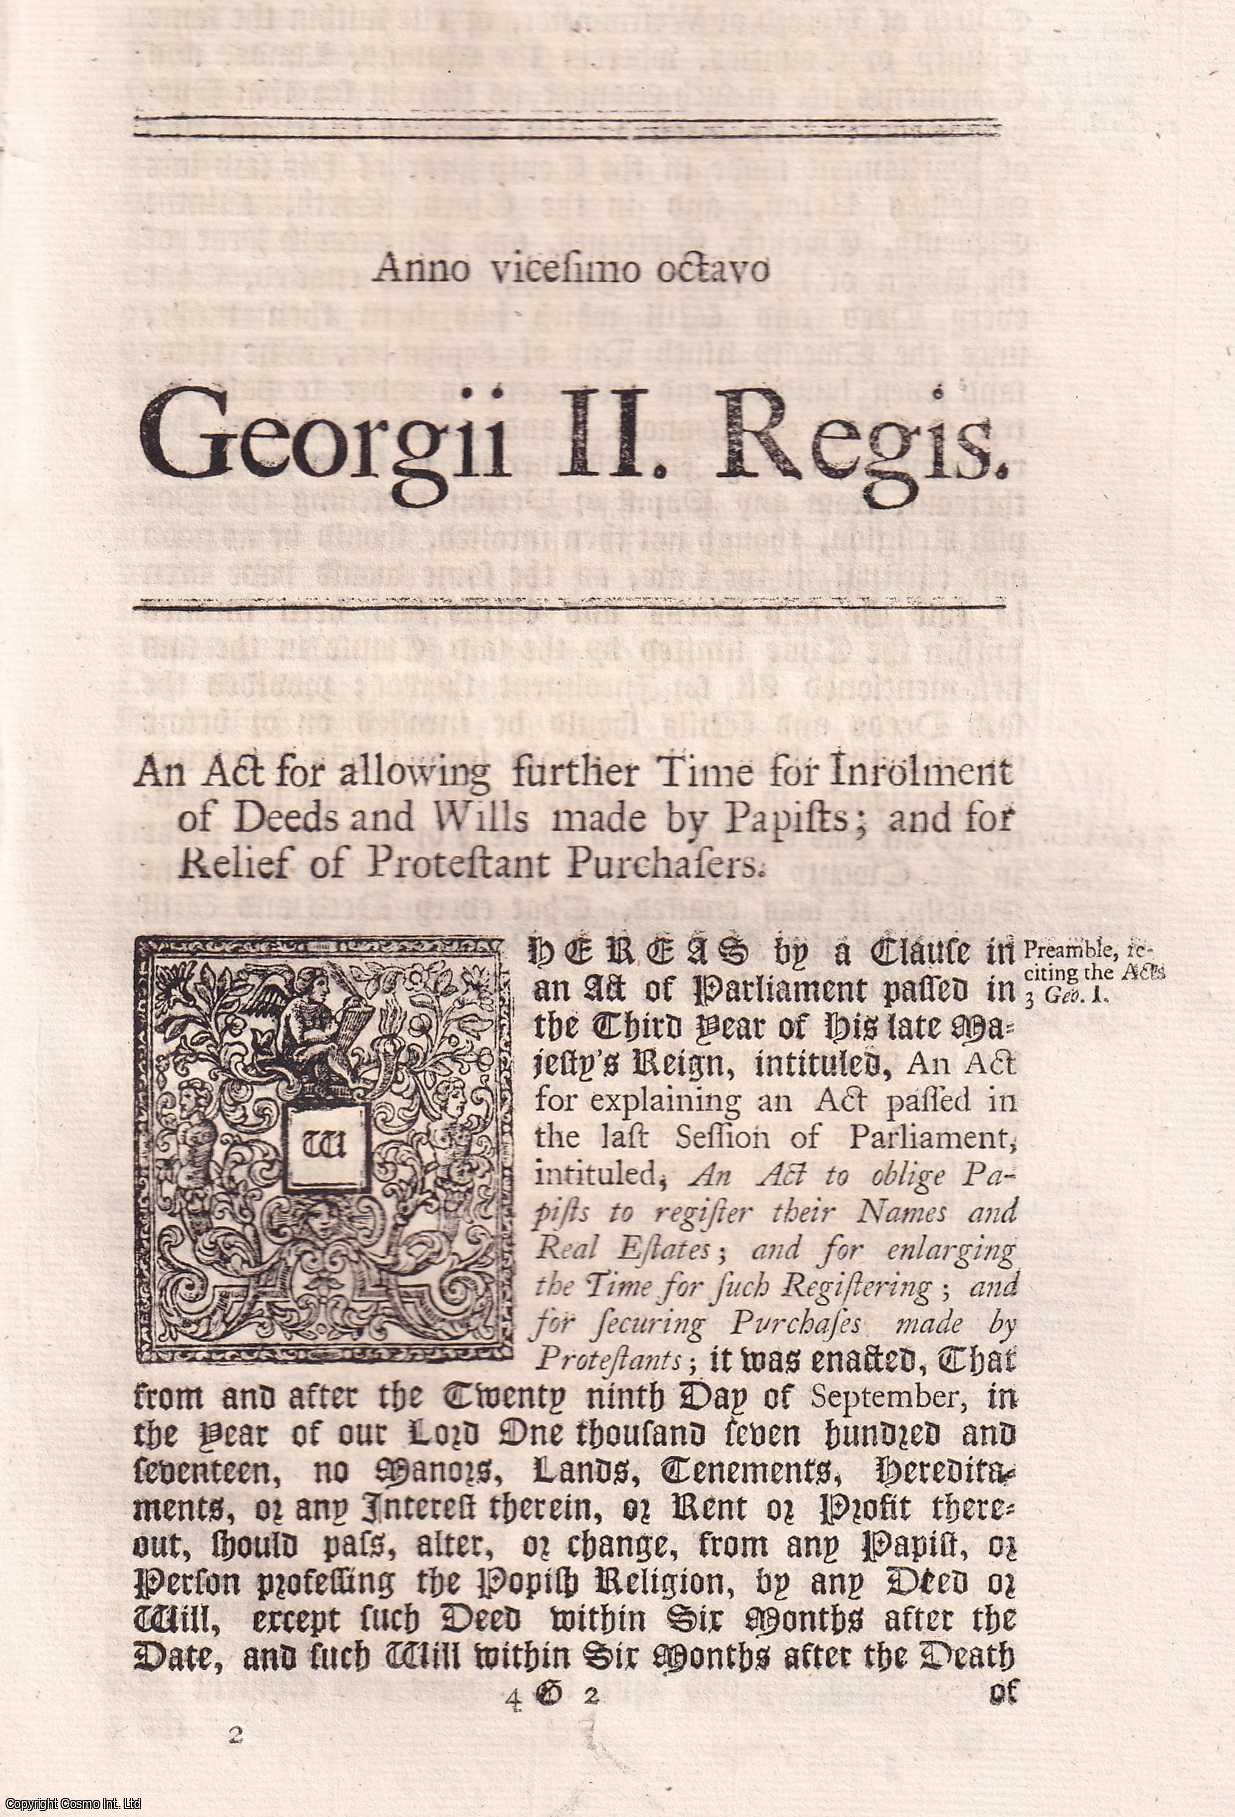 King George II - 1755. An Act for Allowing further Time for Inrolment of Deeds and Wills made by Papists, and for Relief of Protestant Purchasers.